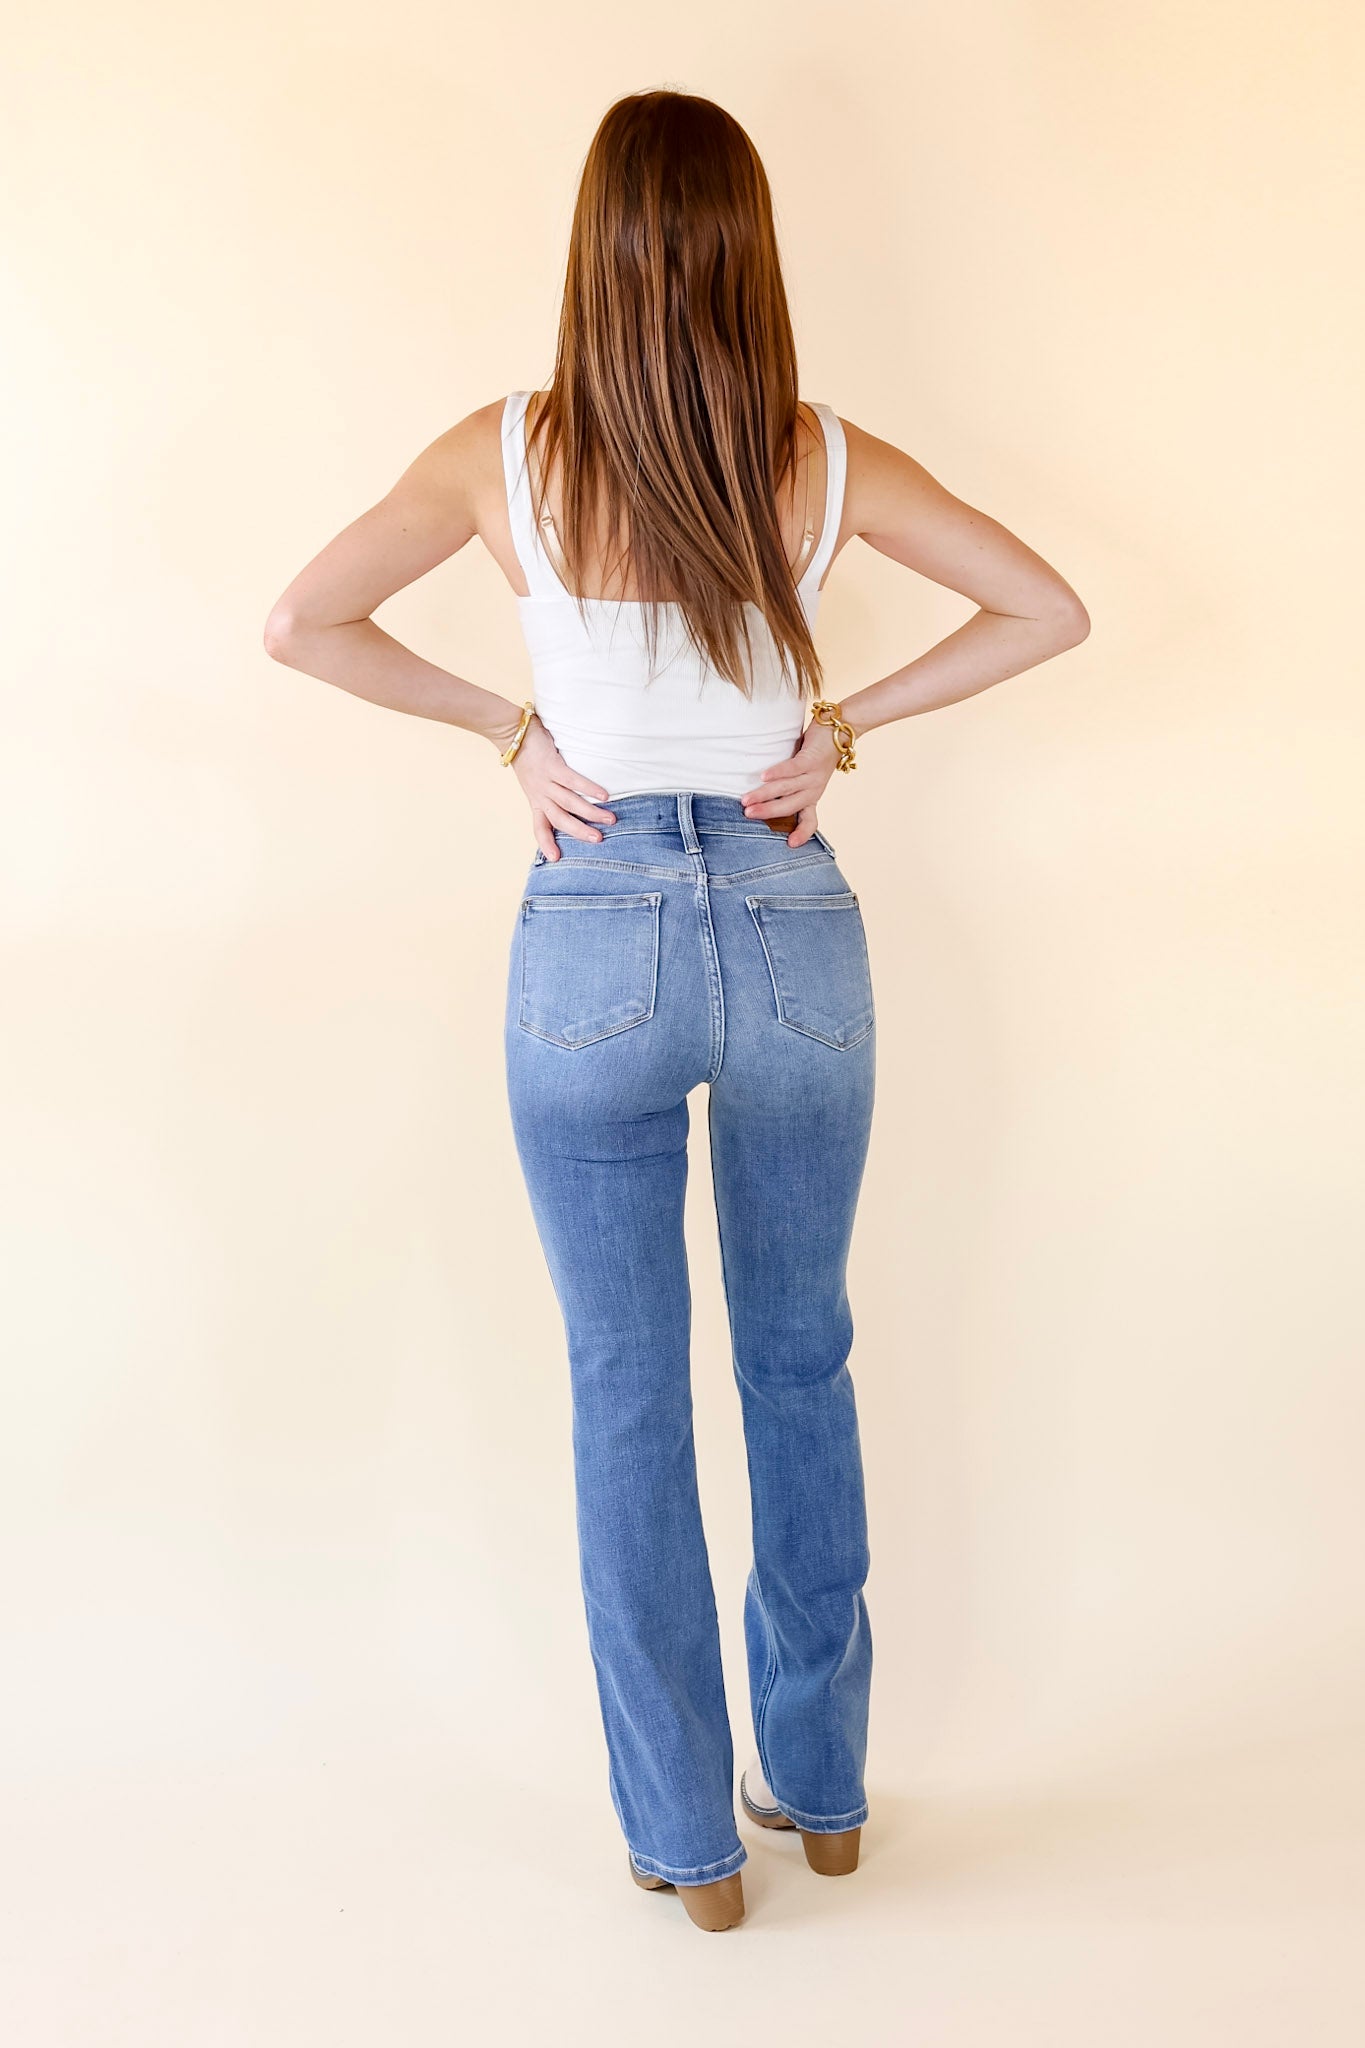 Judy Blue | All The Rage Bootcut Jeans in Medium Wash - Giddy Up Glamour Boutique